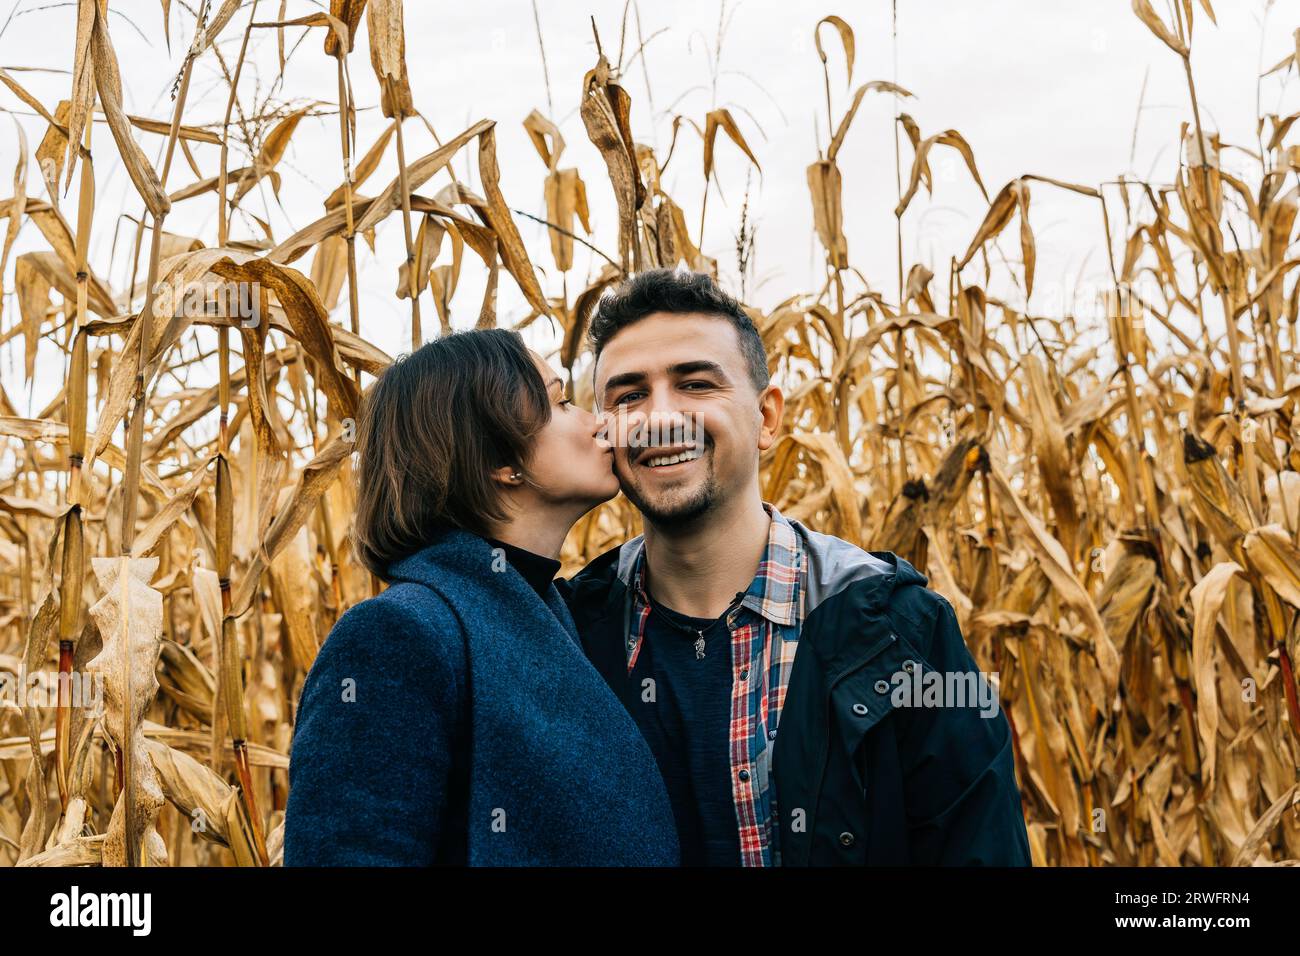 Woman kissing happy smiling man on the cheek standing in autumn in a cornfield Stock Photo